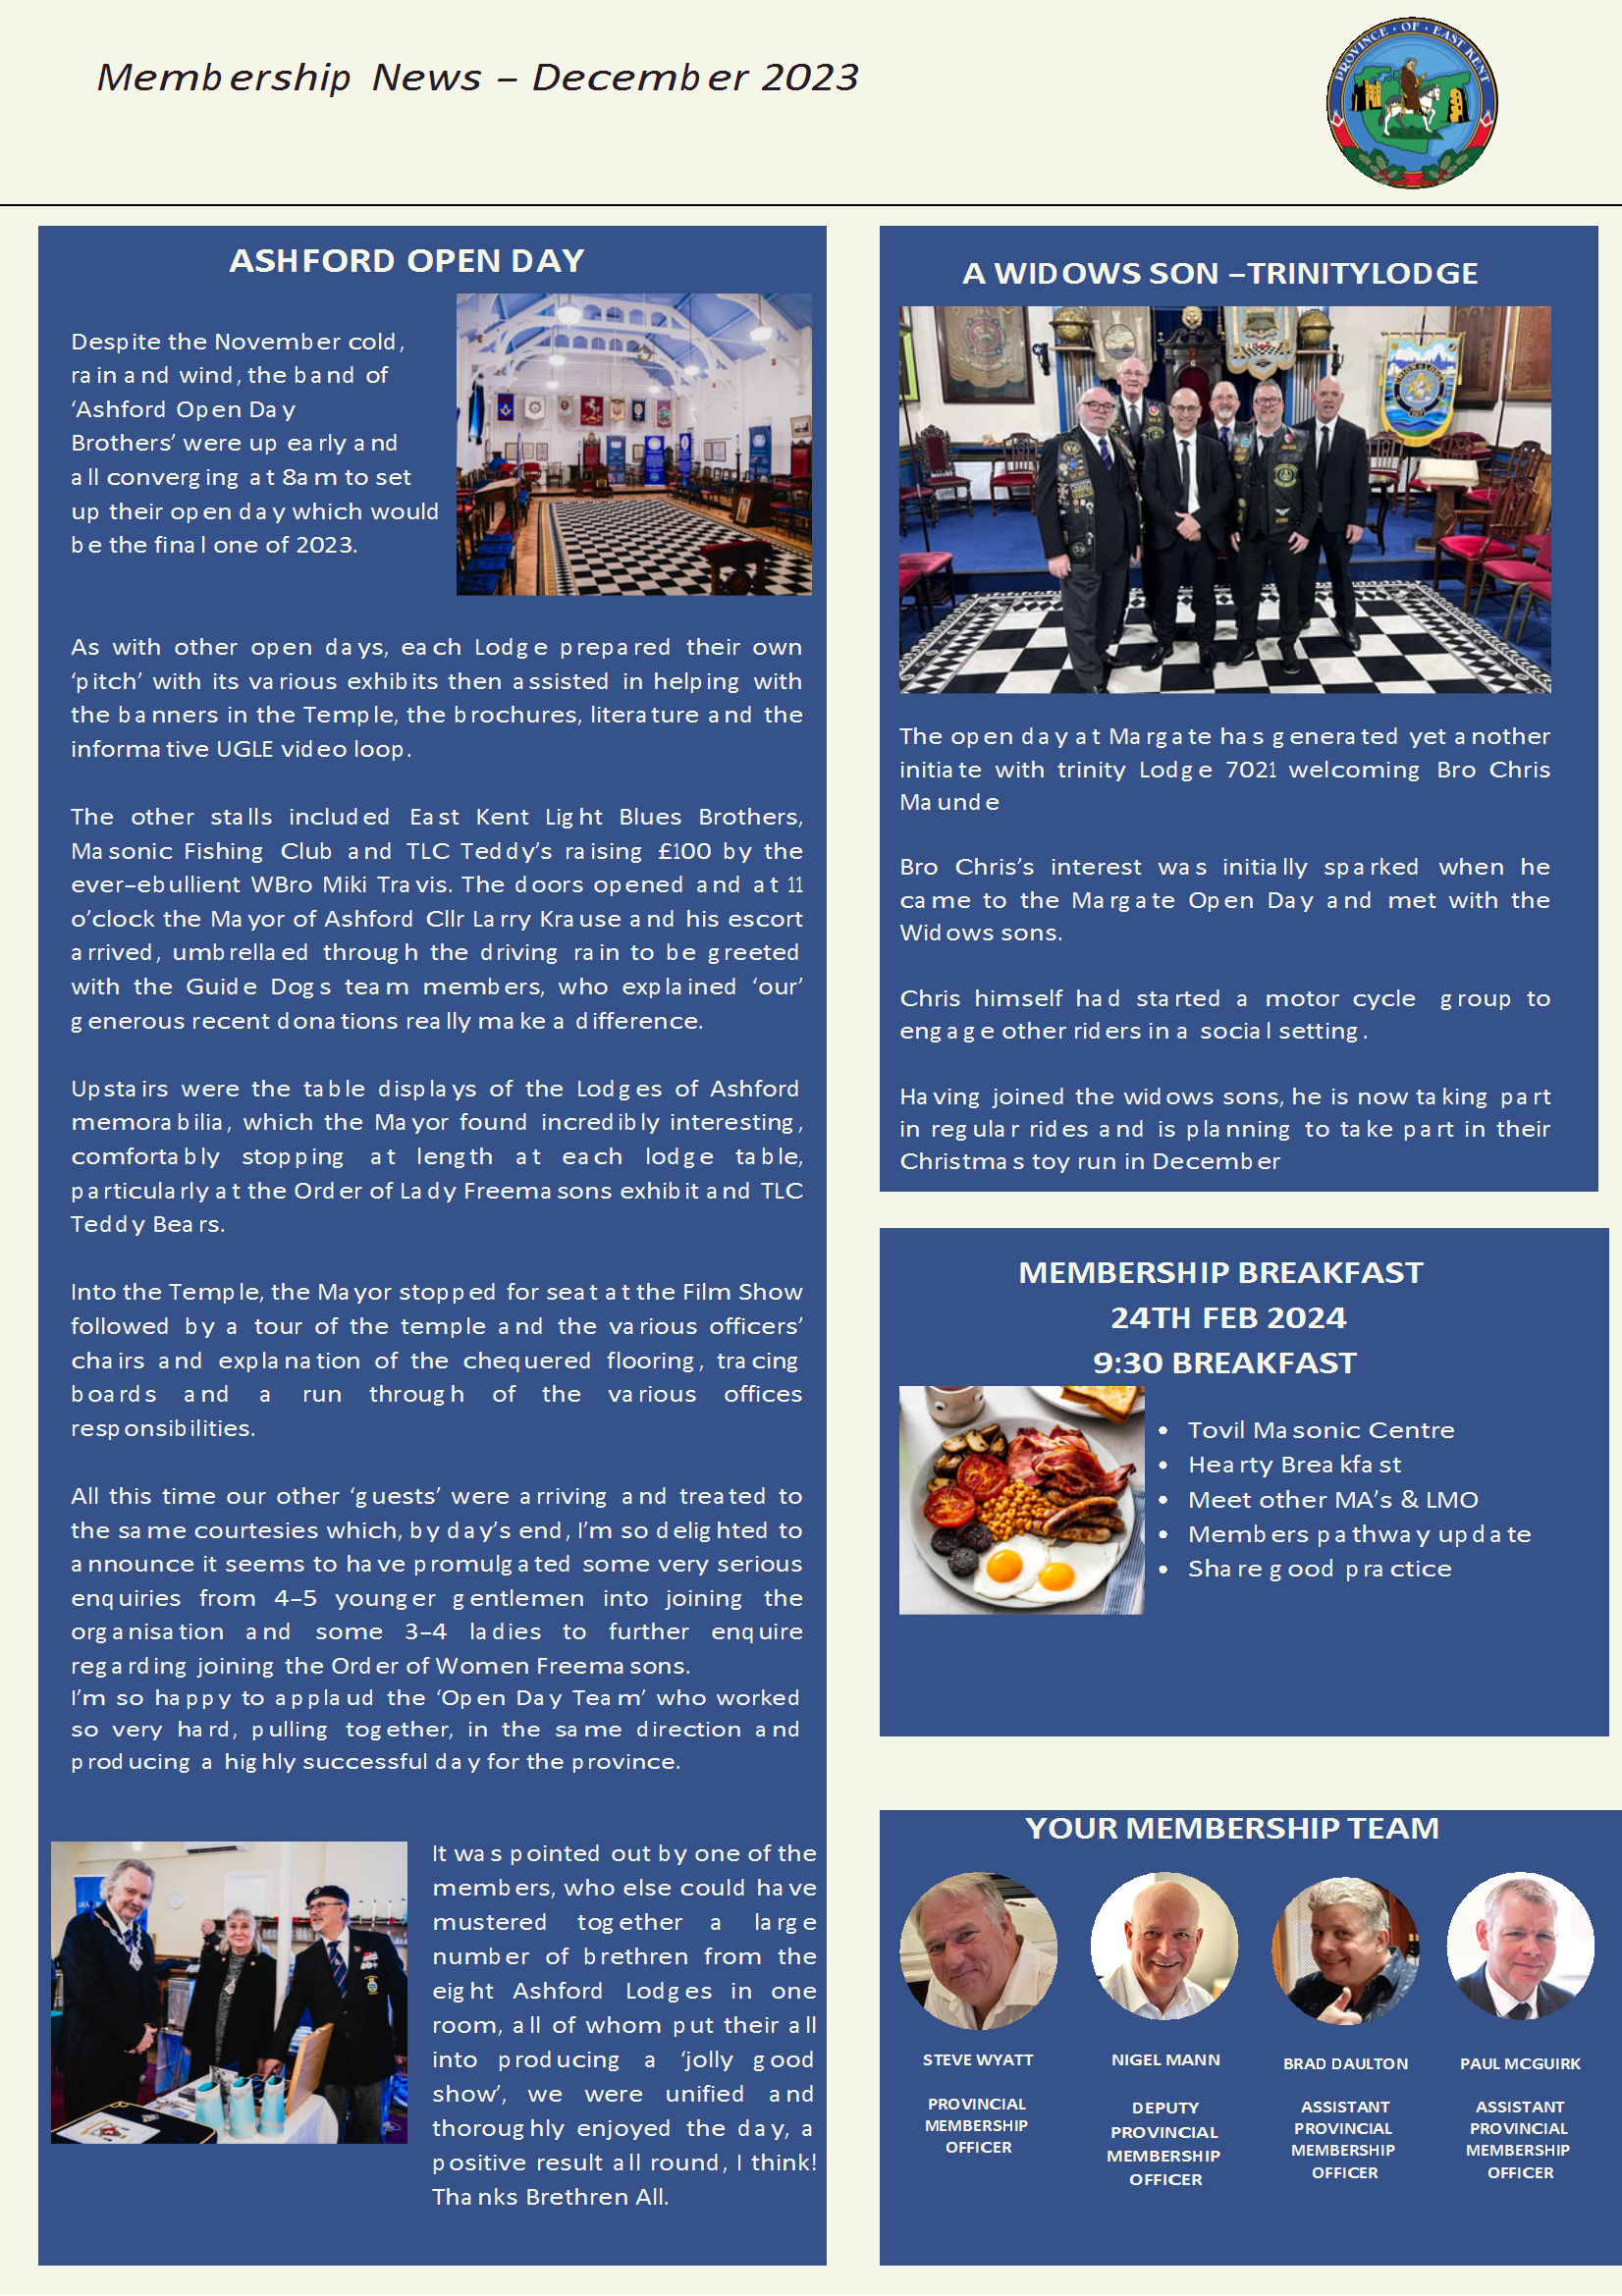 2nd page of the membership news page